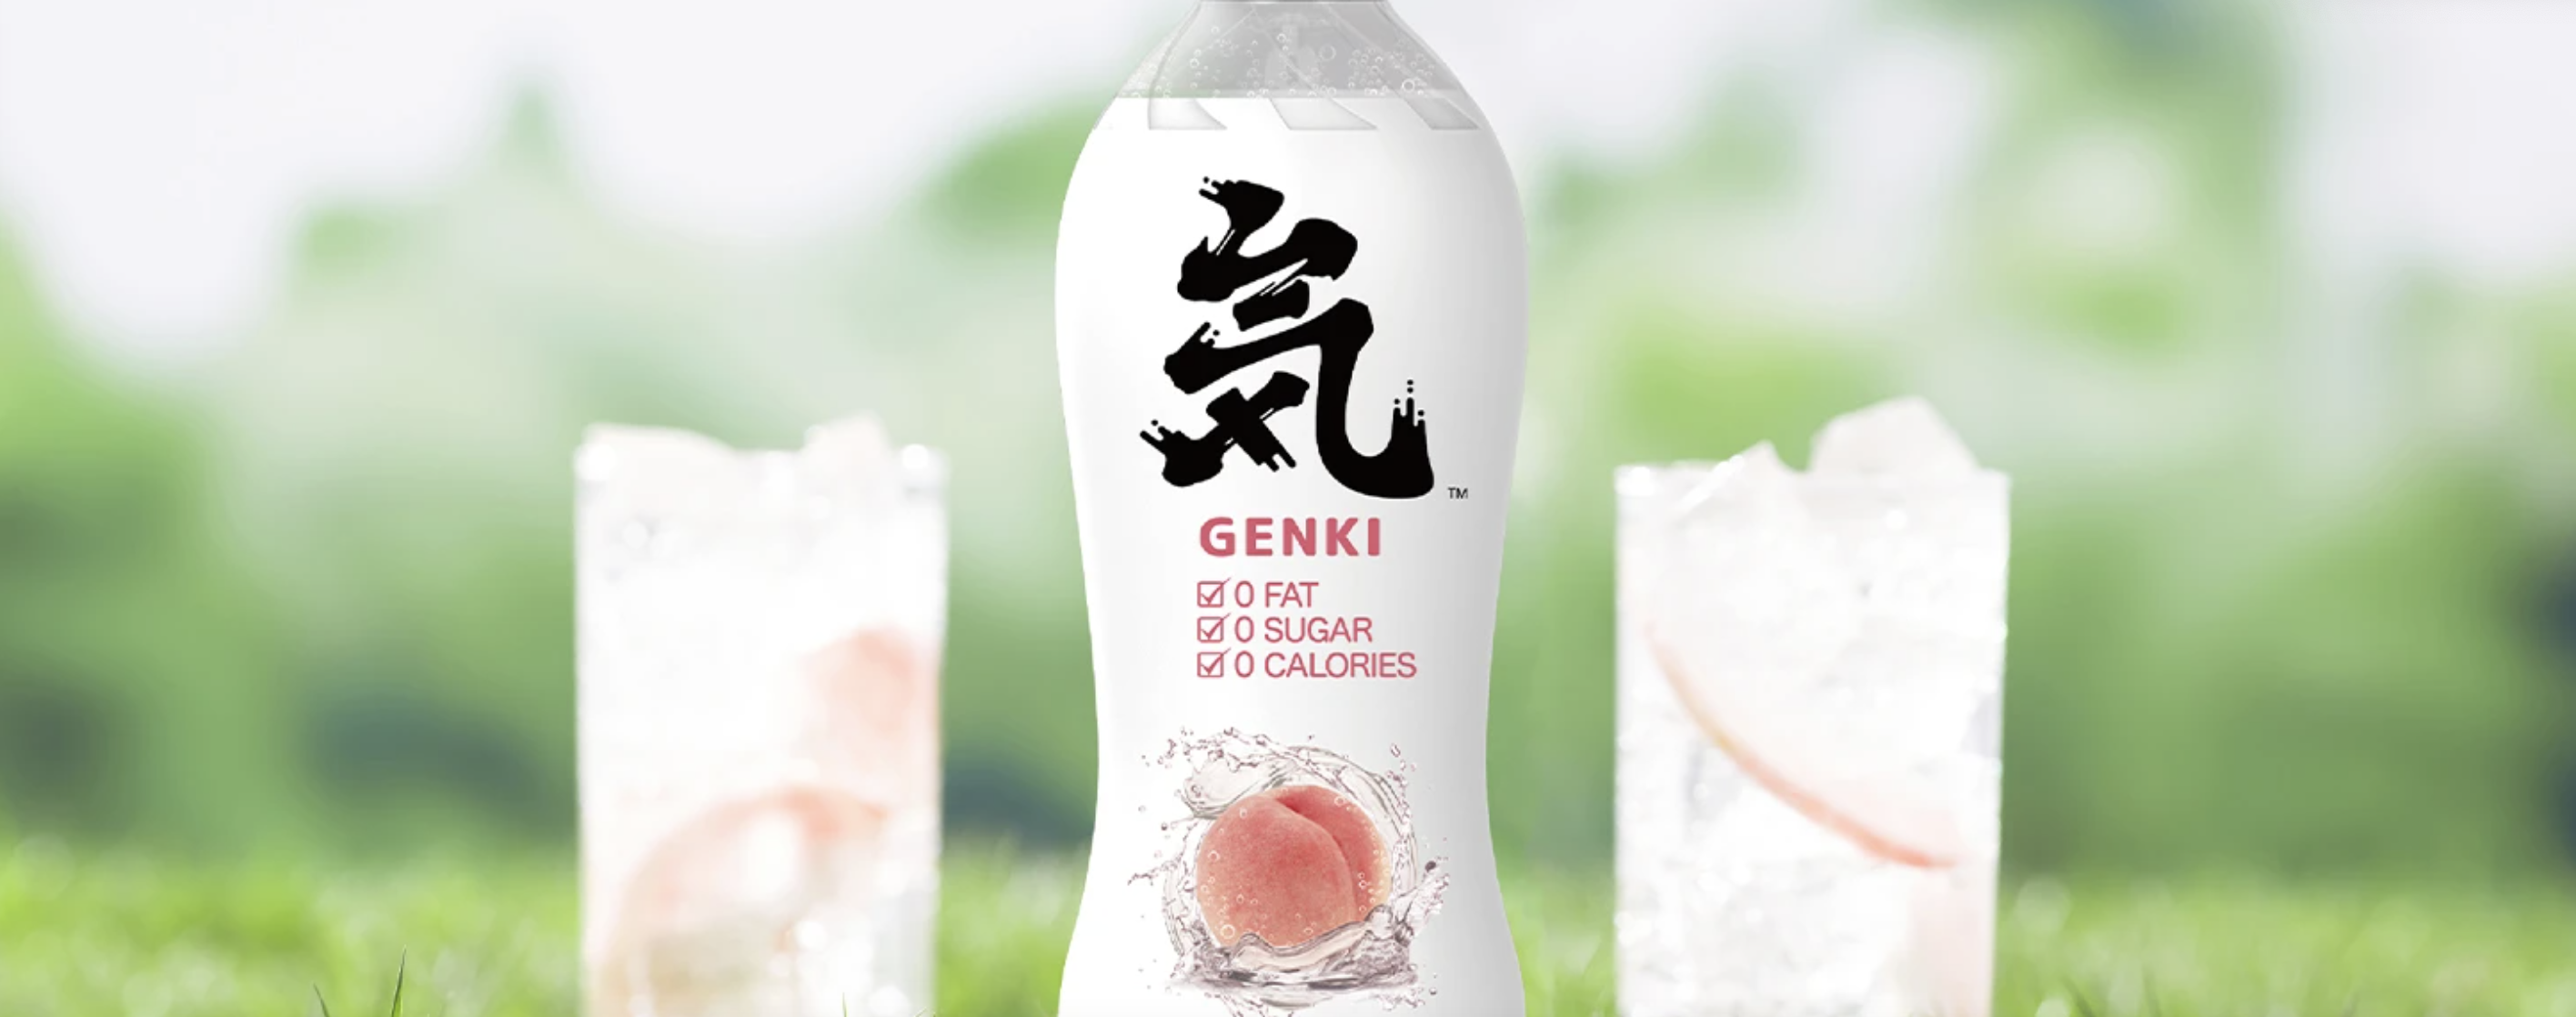 China’s fast-growing sparkling water maker Genki Forest wants to grow faster, will it succeed? (Part 2)